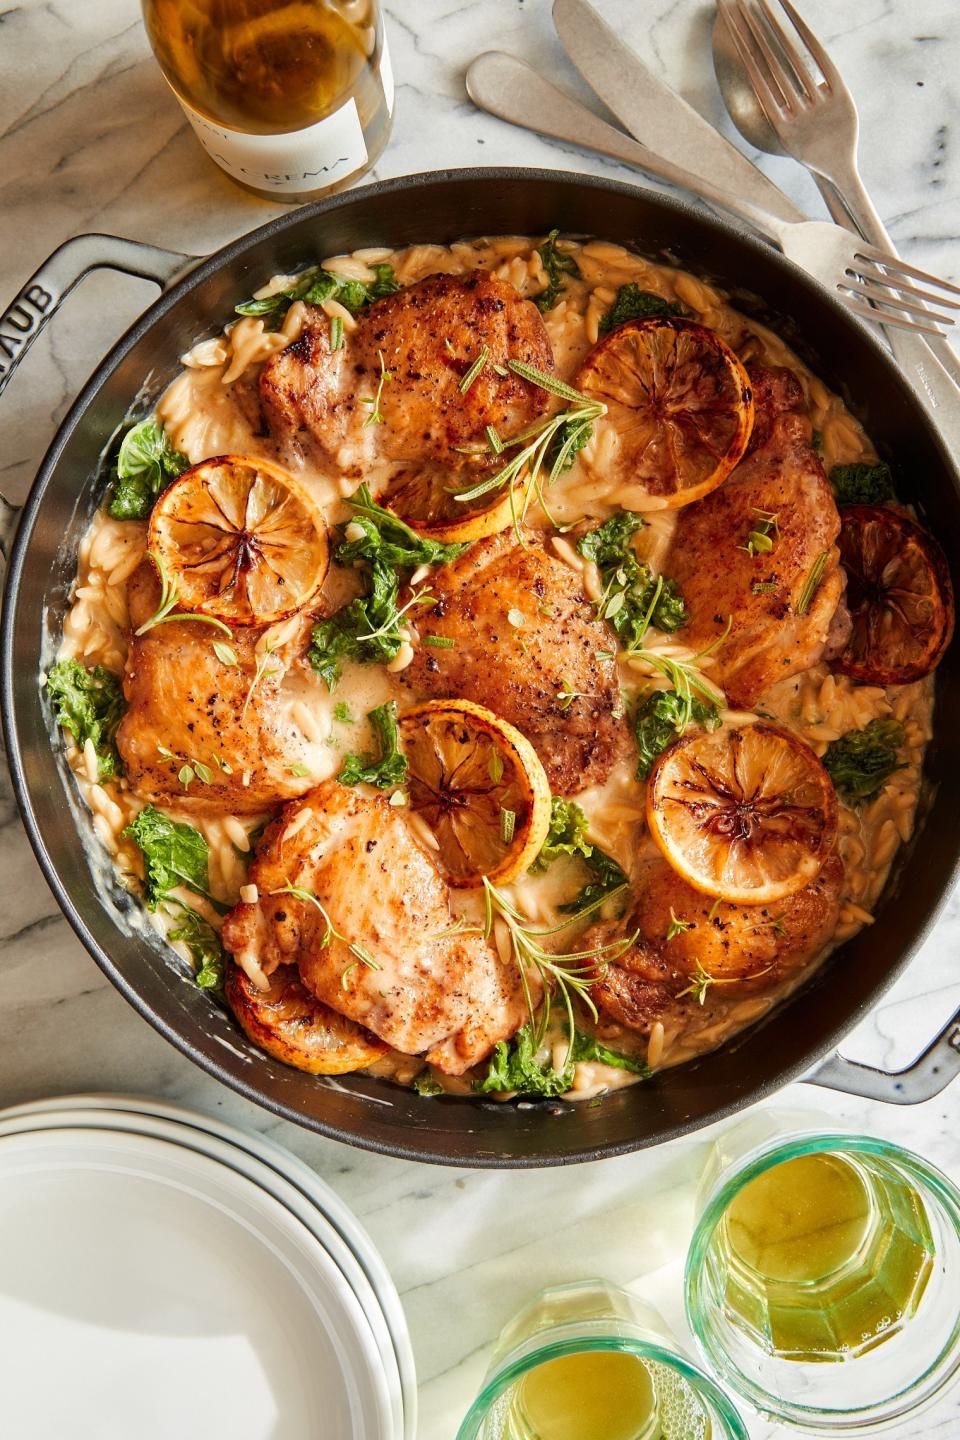 Skillet with chicken, herbs, and slices of lemon, served with drinks on the side. Perfect for a gourmet meal feature